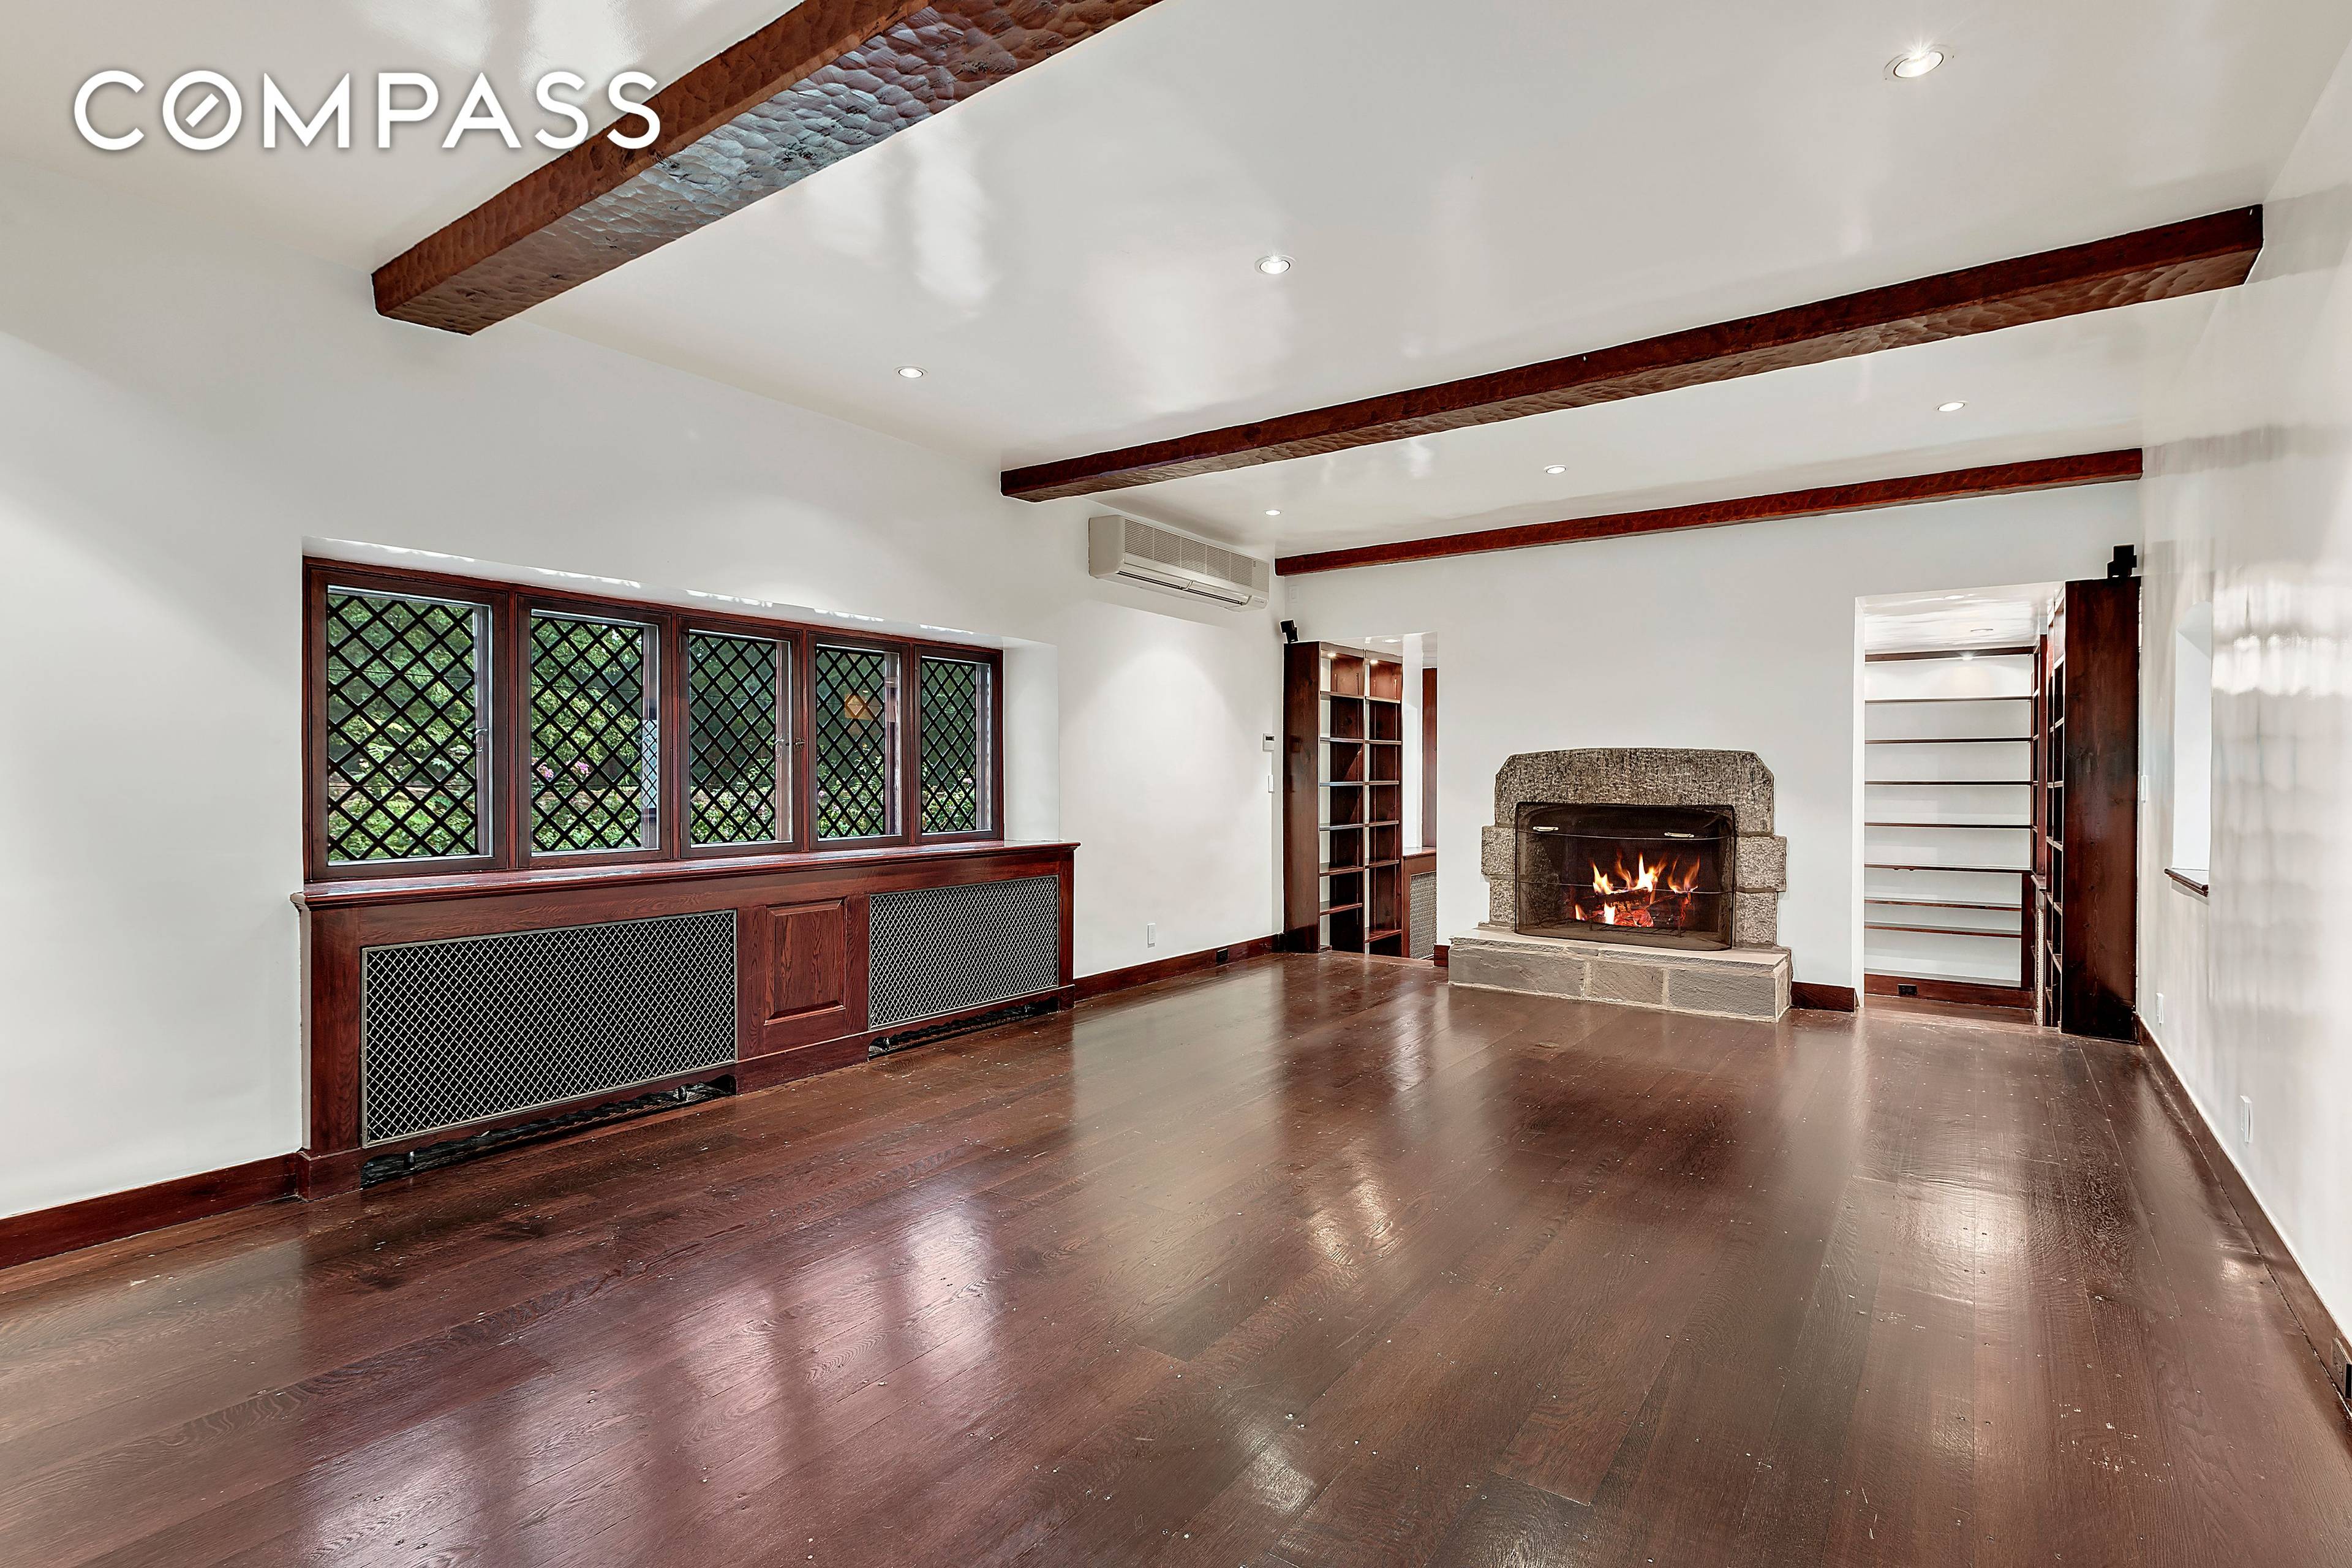 THIS FIVE BEDROOM HOME with a SPRAWLING BACKYARD has QUICK AND EASY access to Manhattan.